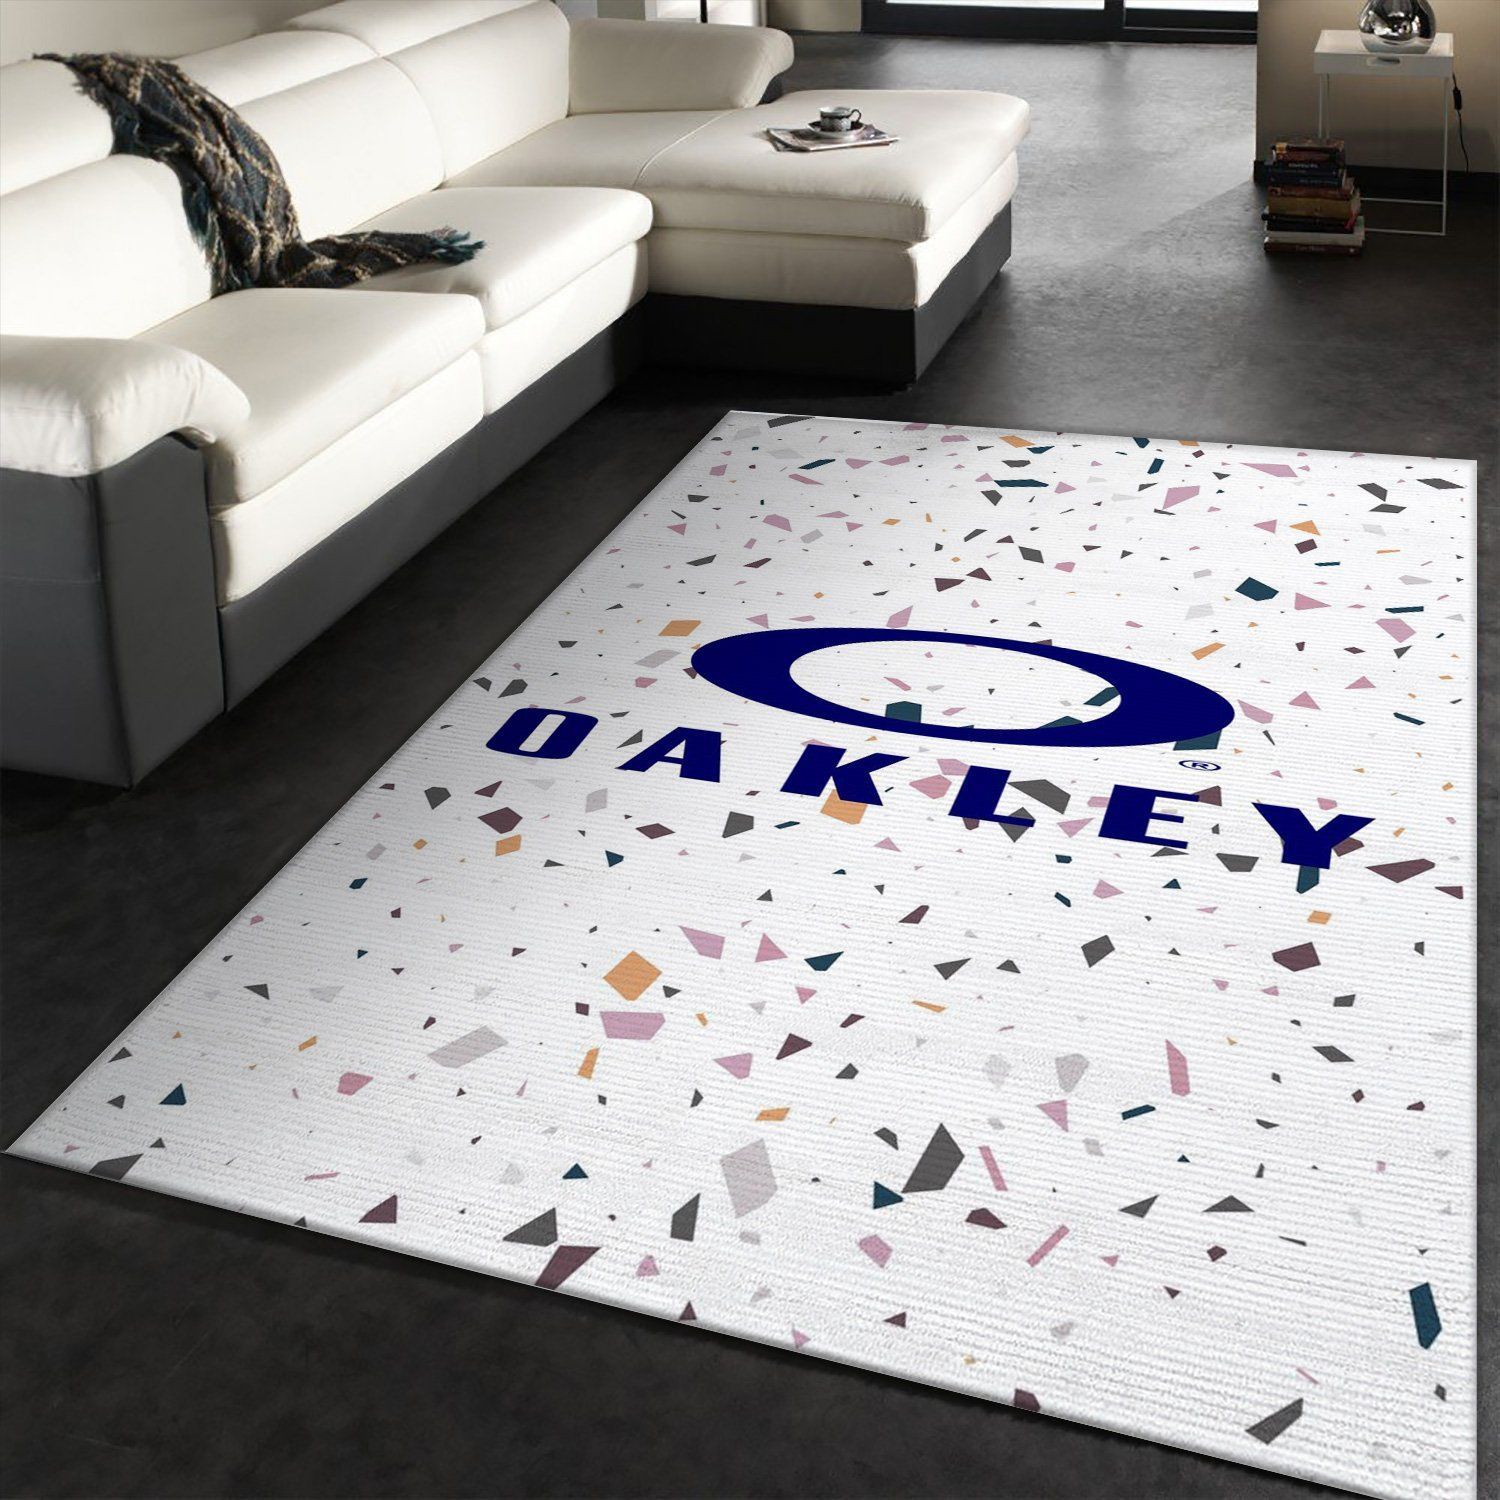 Rugs in Living Room and Bedroom - Oakley area rug fashion brand rug floor decor home decor